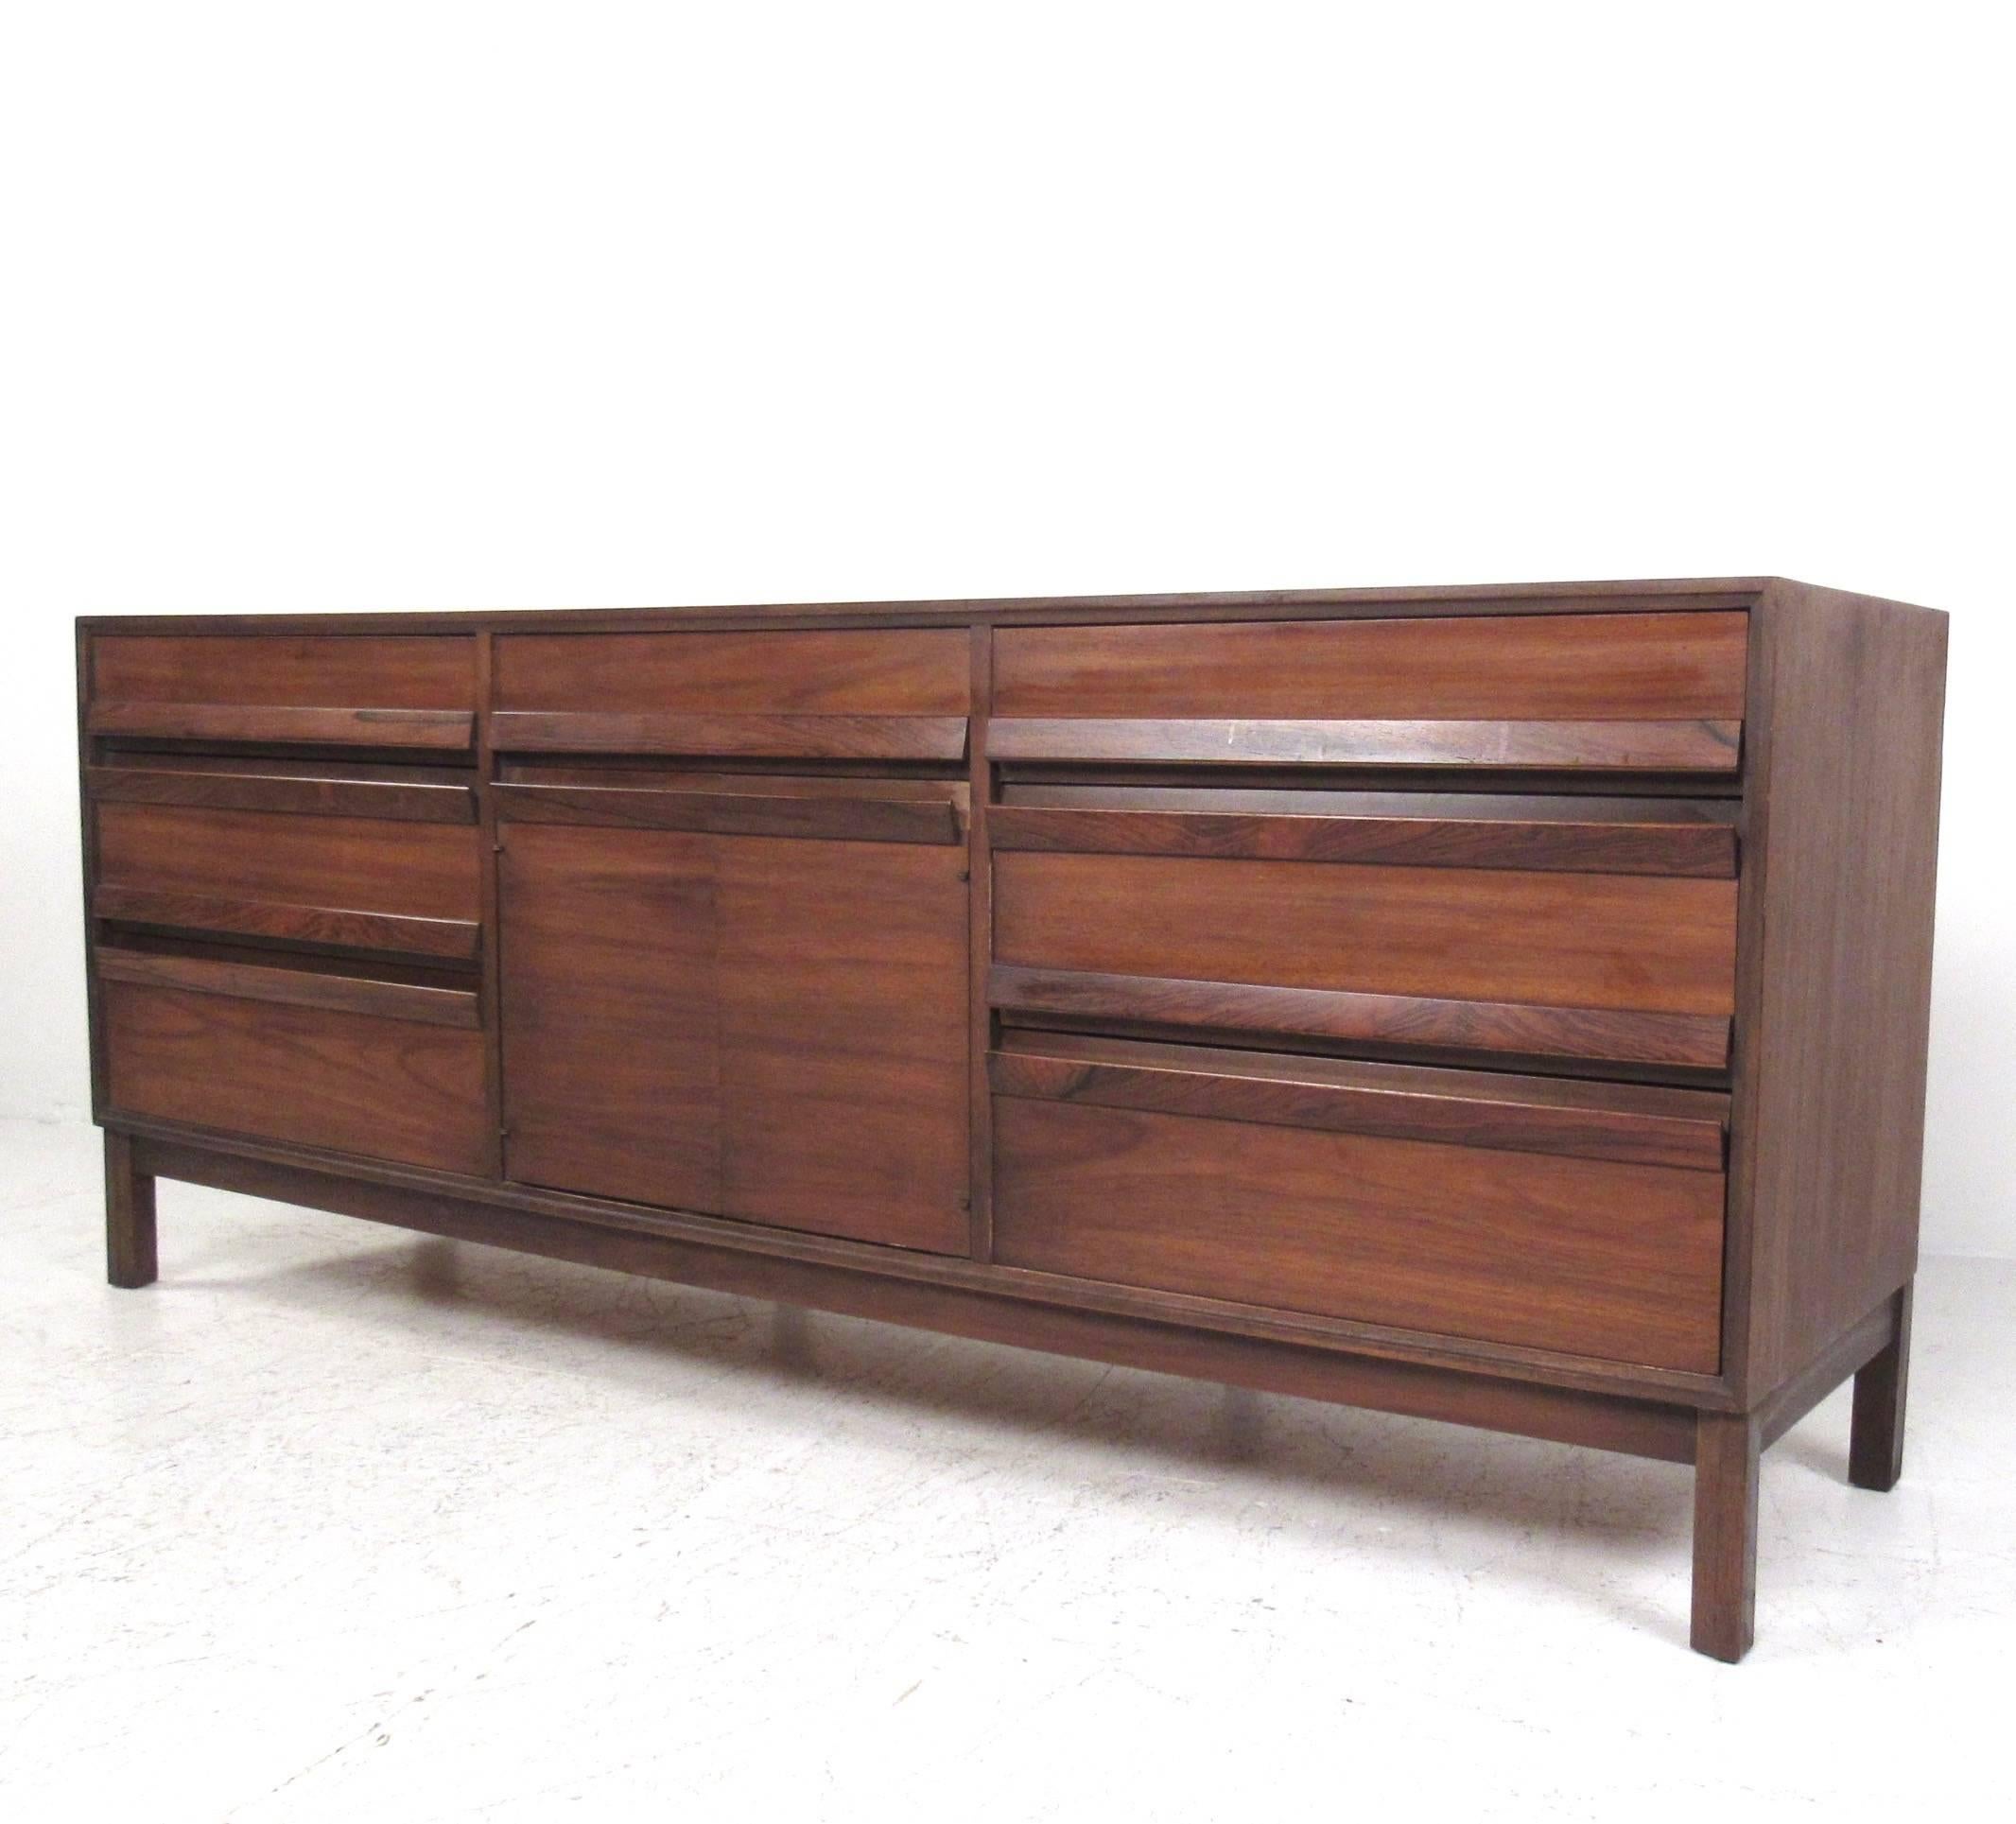 This vintage modern dresser features subtle sculpted rosewood drawer handles, rich walnut finish with, and quality Mid-Century construction. The large size and spacious storage contained within make this dresser the perfect addition to any interior.